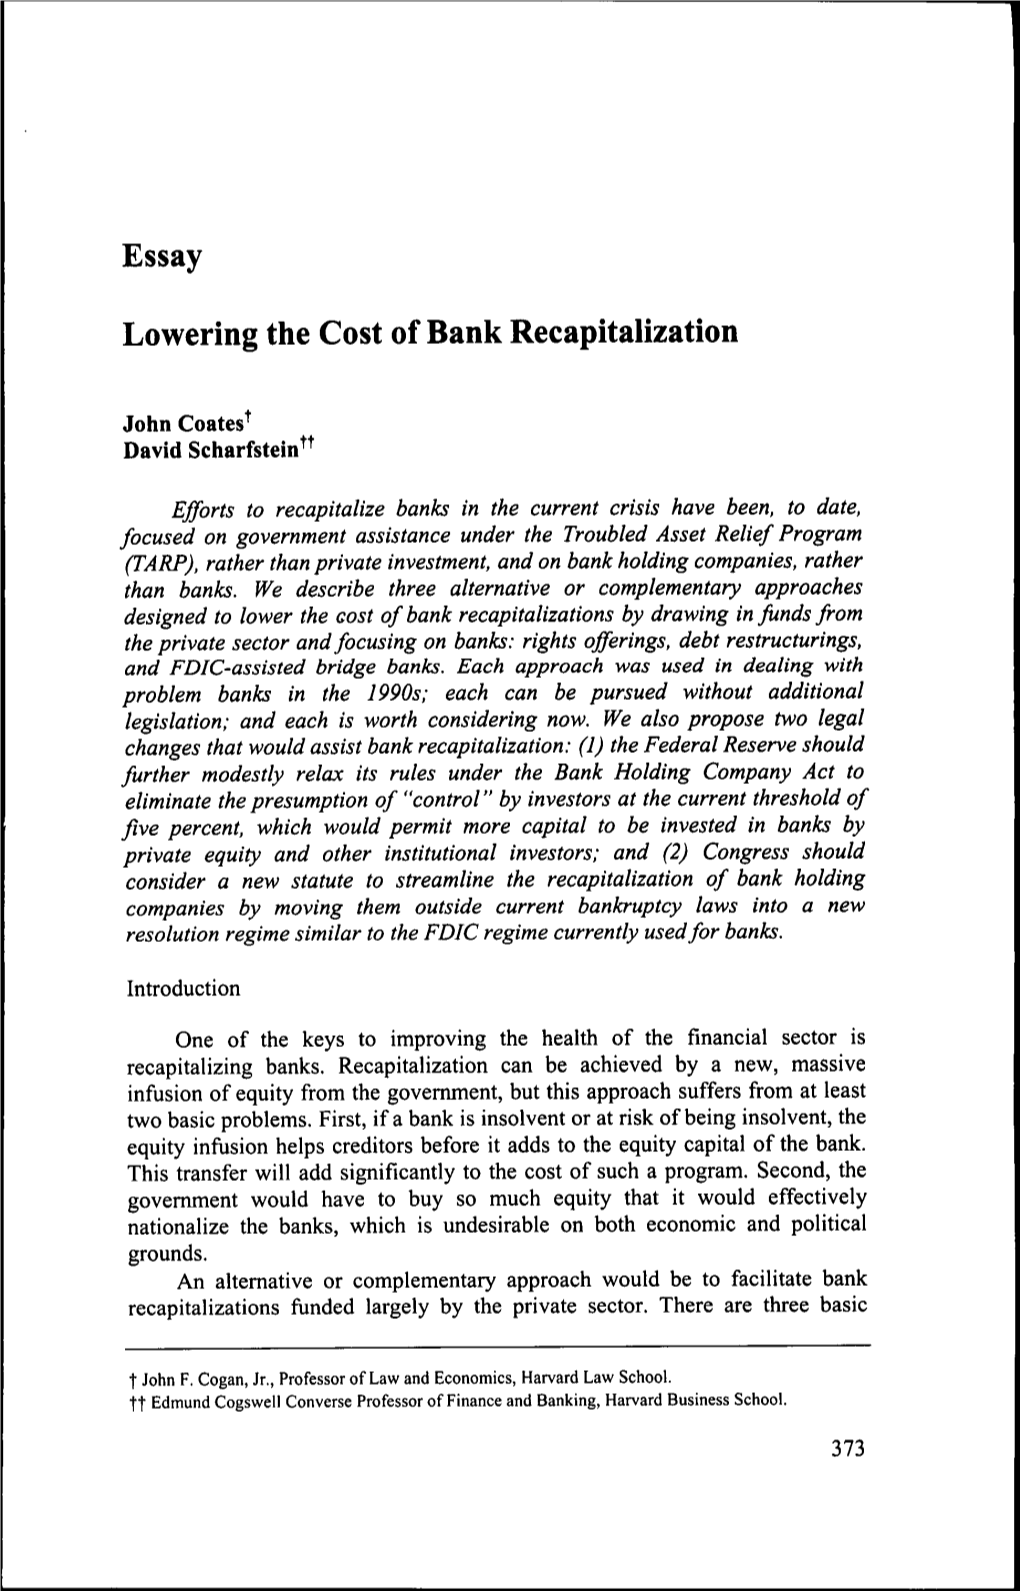 Essay Lowering the Cost of Bank Recapitalization